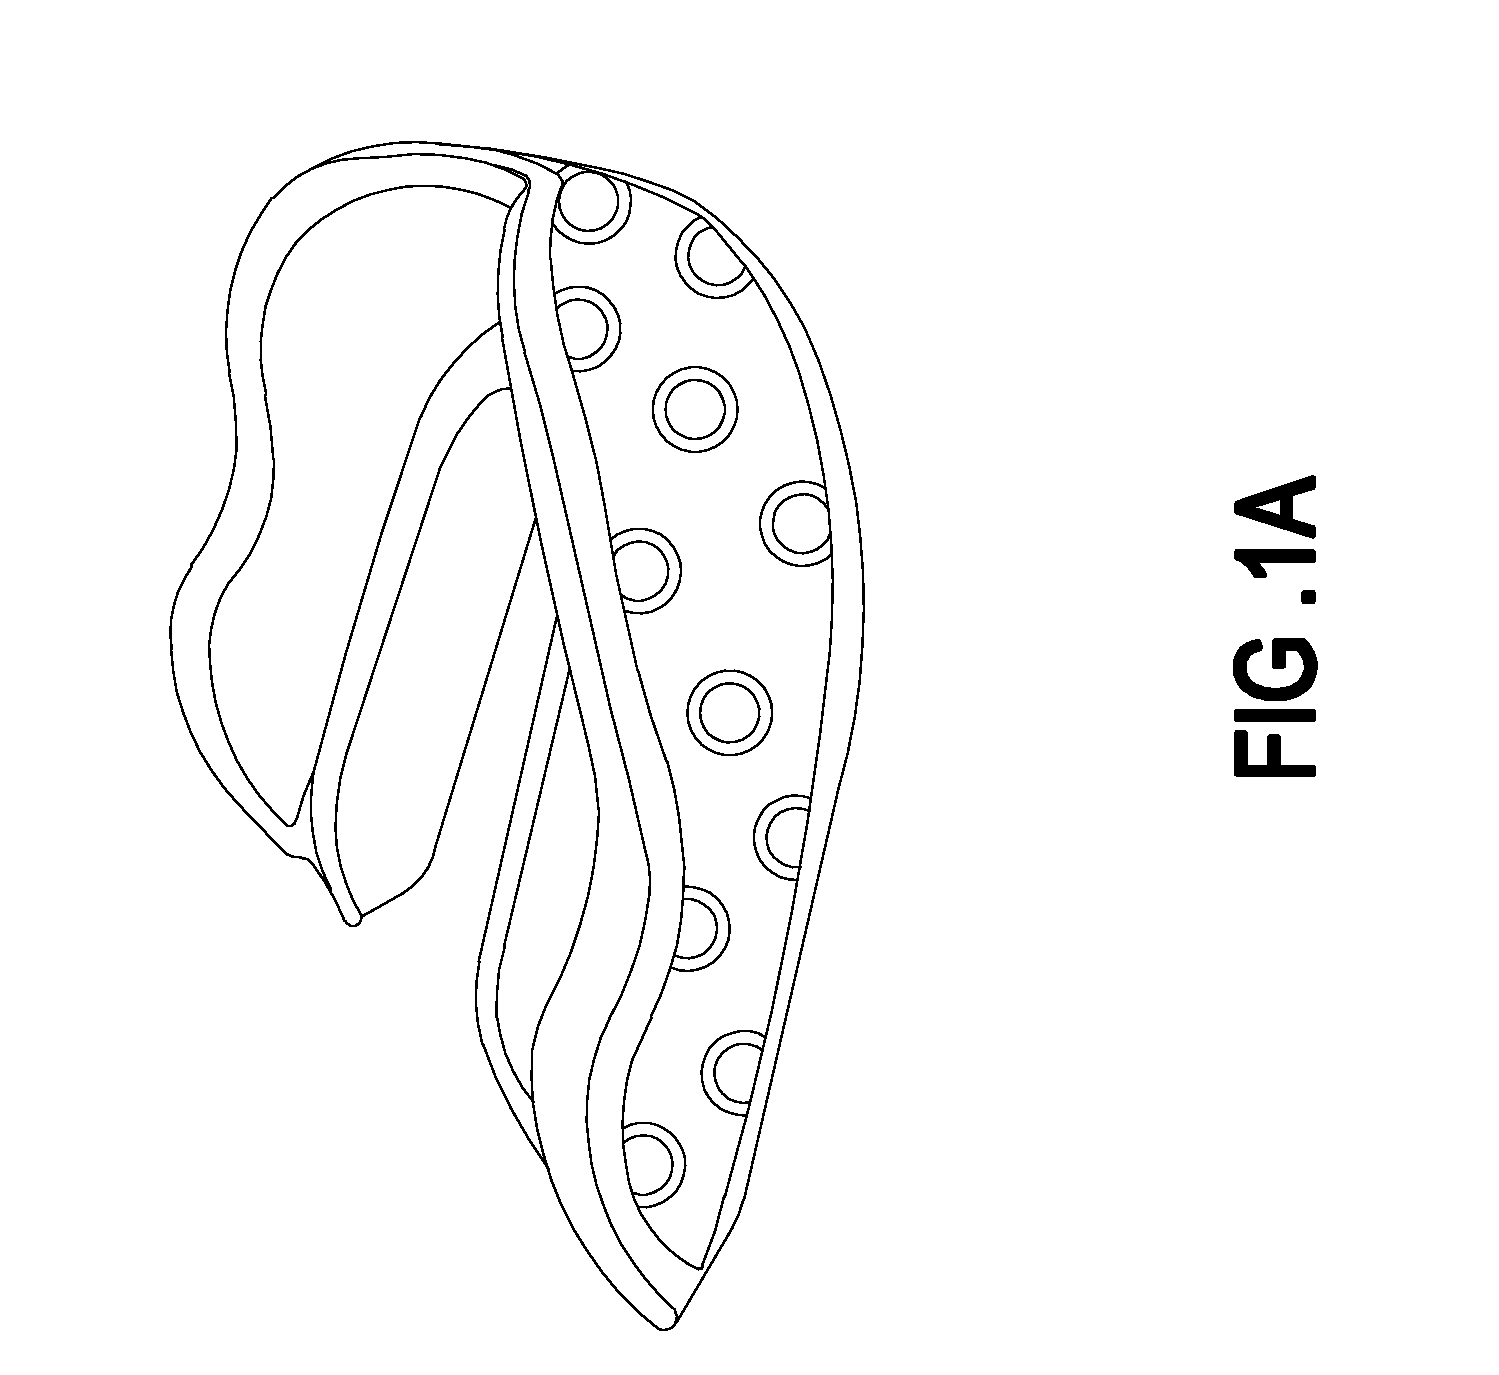 Mouthguard and fabricating method thereof